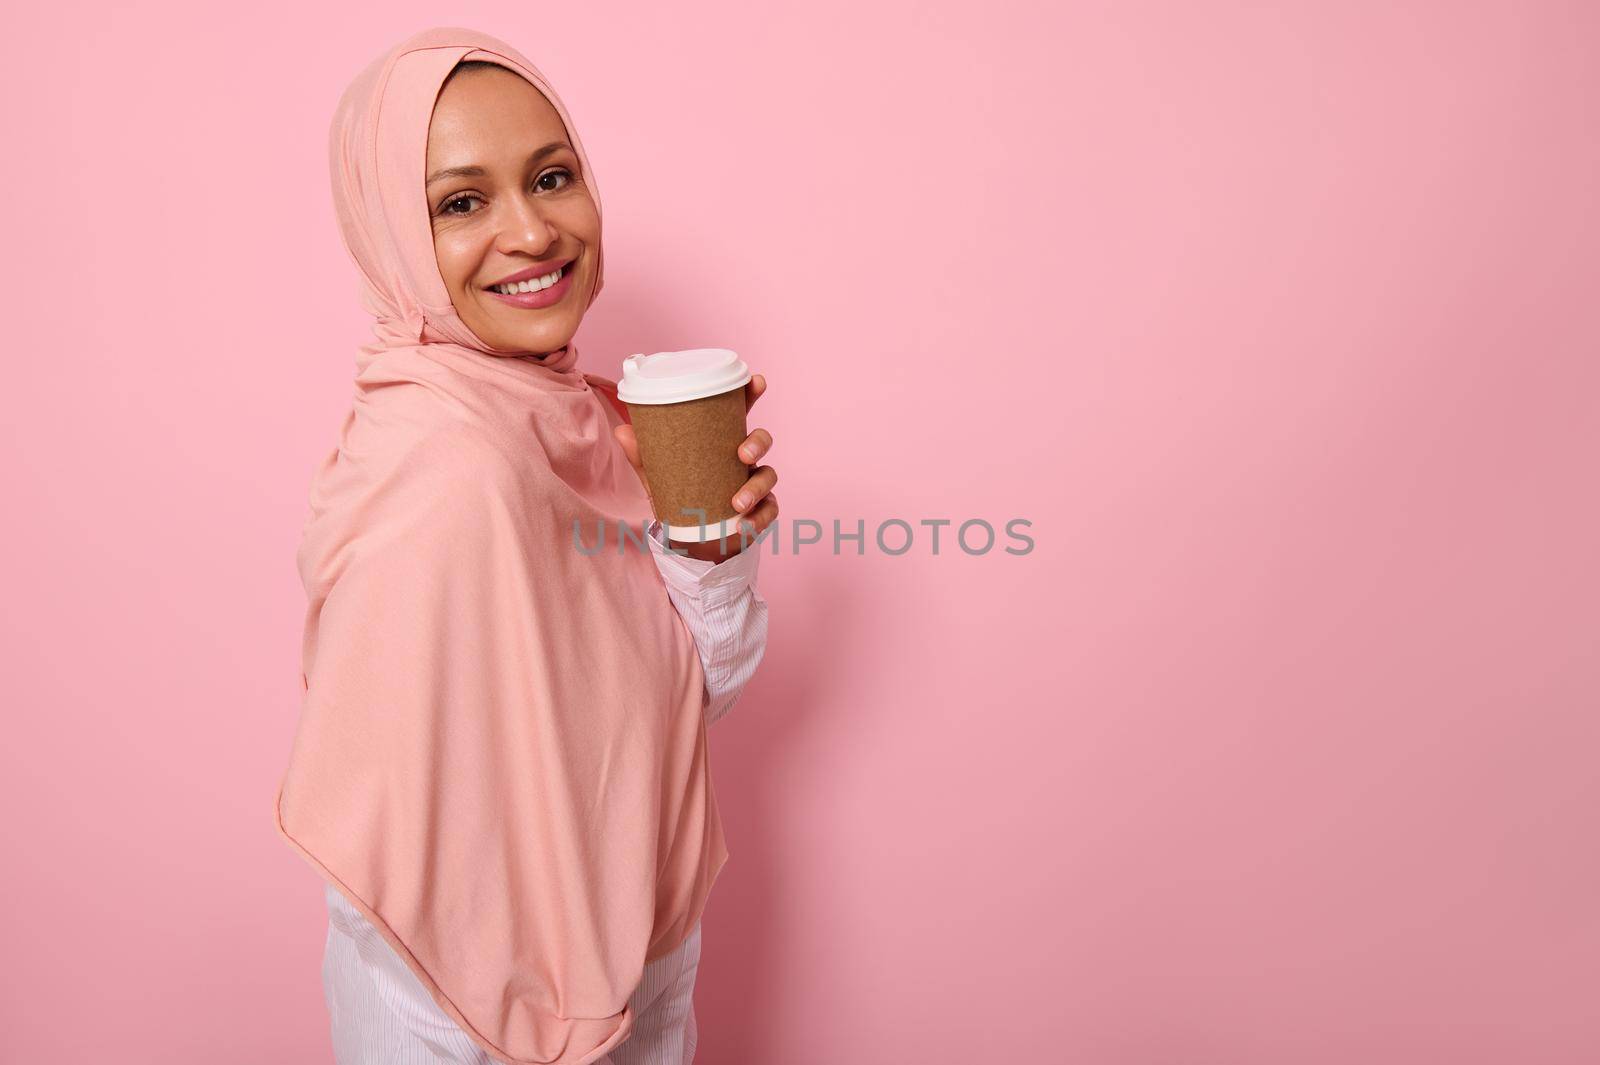 Arabic muslim cheerful woman with covered head in hijab stands three quarters against pink background with takeaway cup from disposable cardboard of hot drink, smiles looking at camera. Copy space